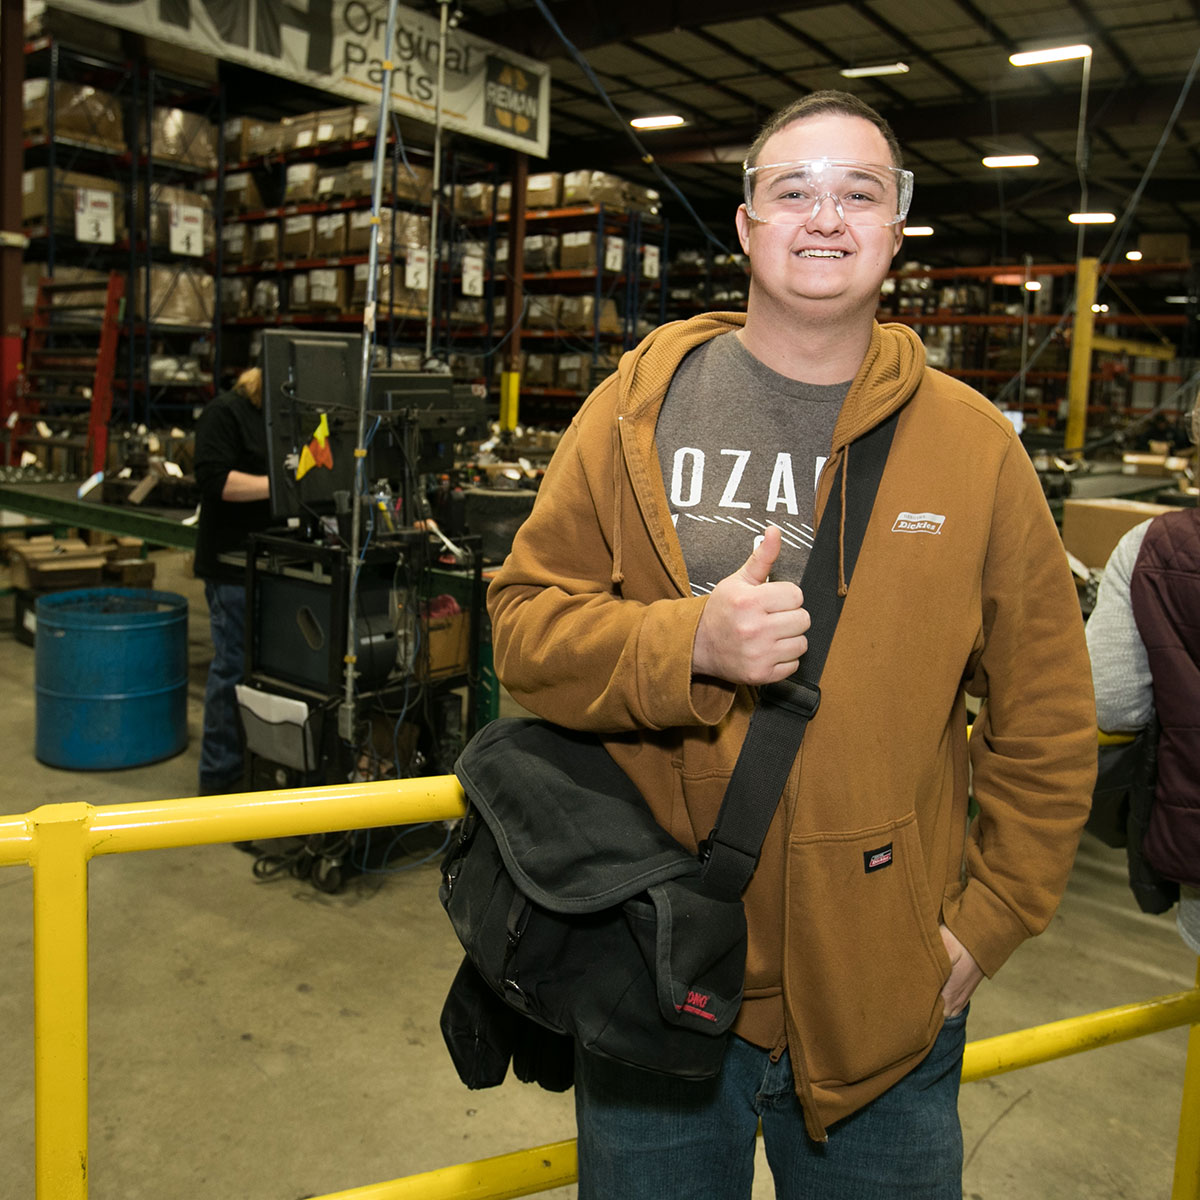 An MSU student smiles as he tours an industrial supply facility.